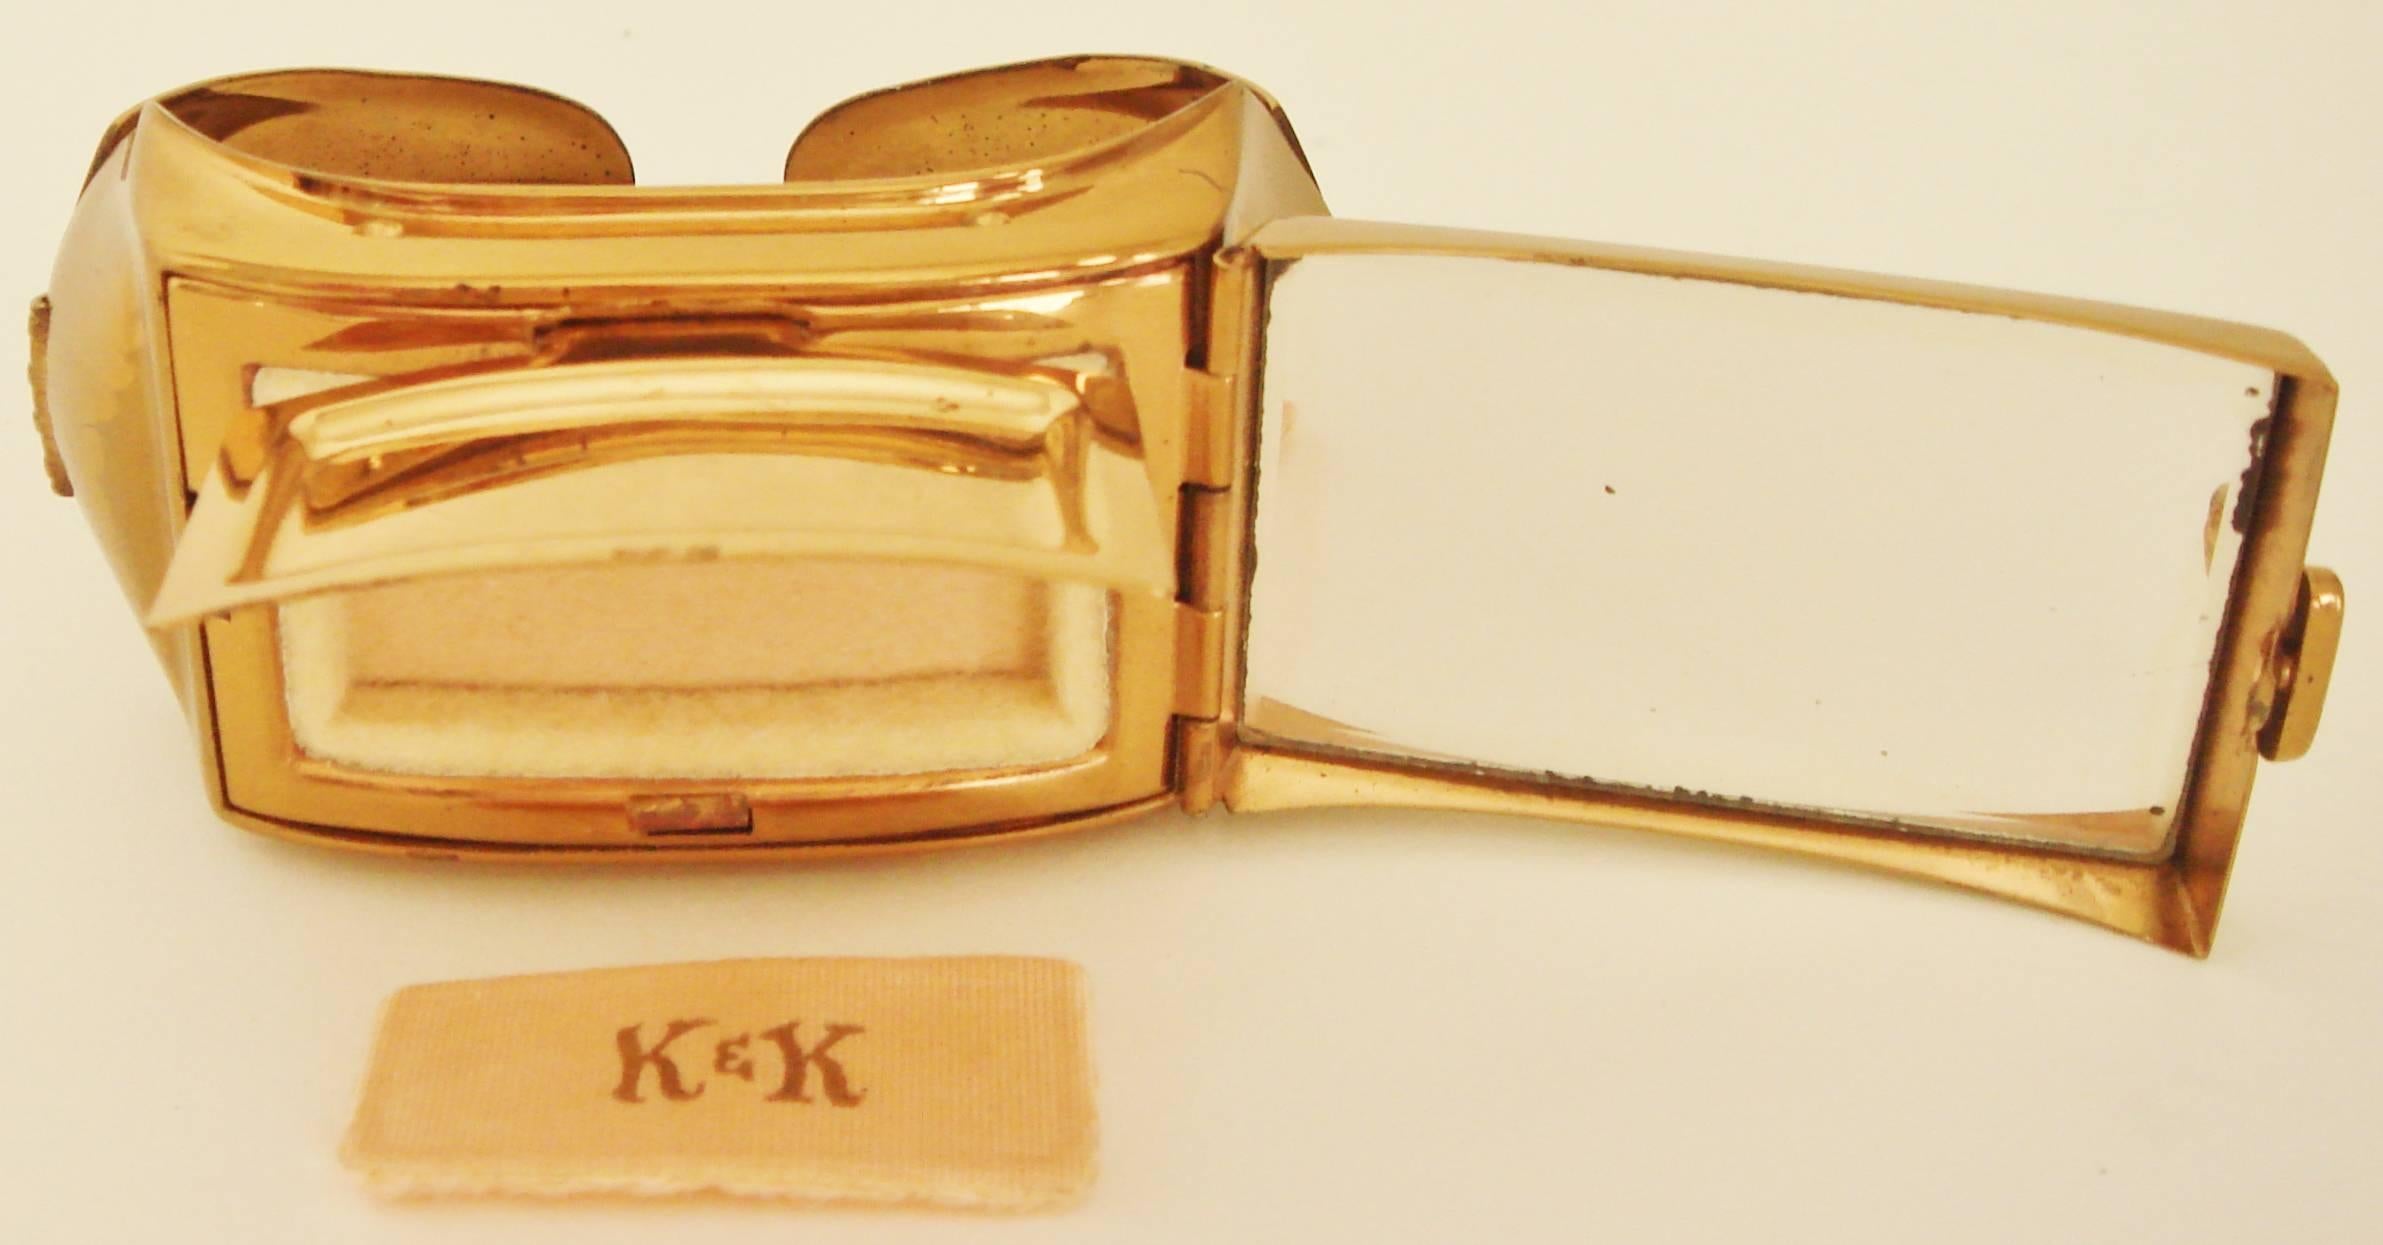 Mid-20th Century Rare American Art Deco Brass-Plated Geometric Compact Clamper Bracelet by K & K